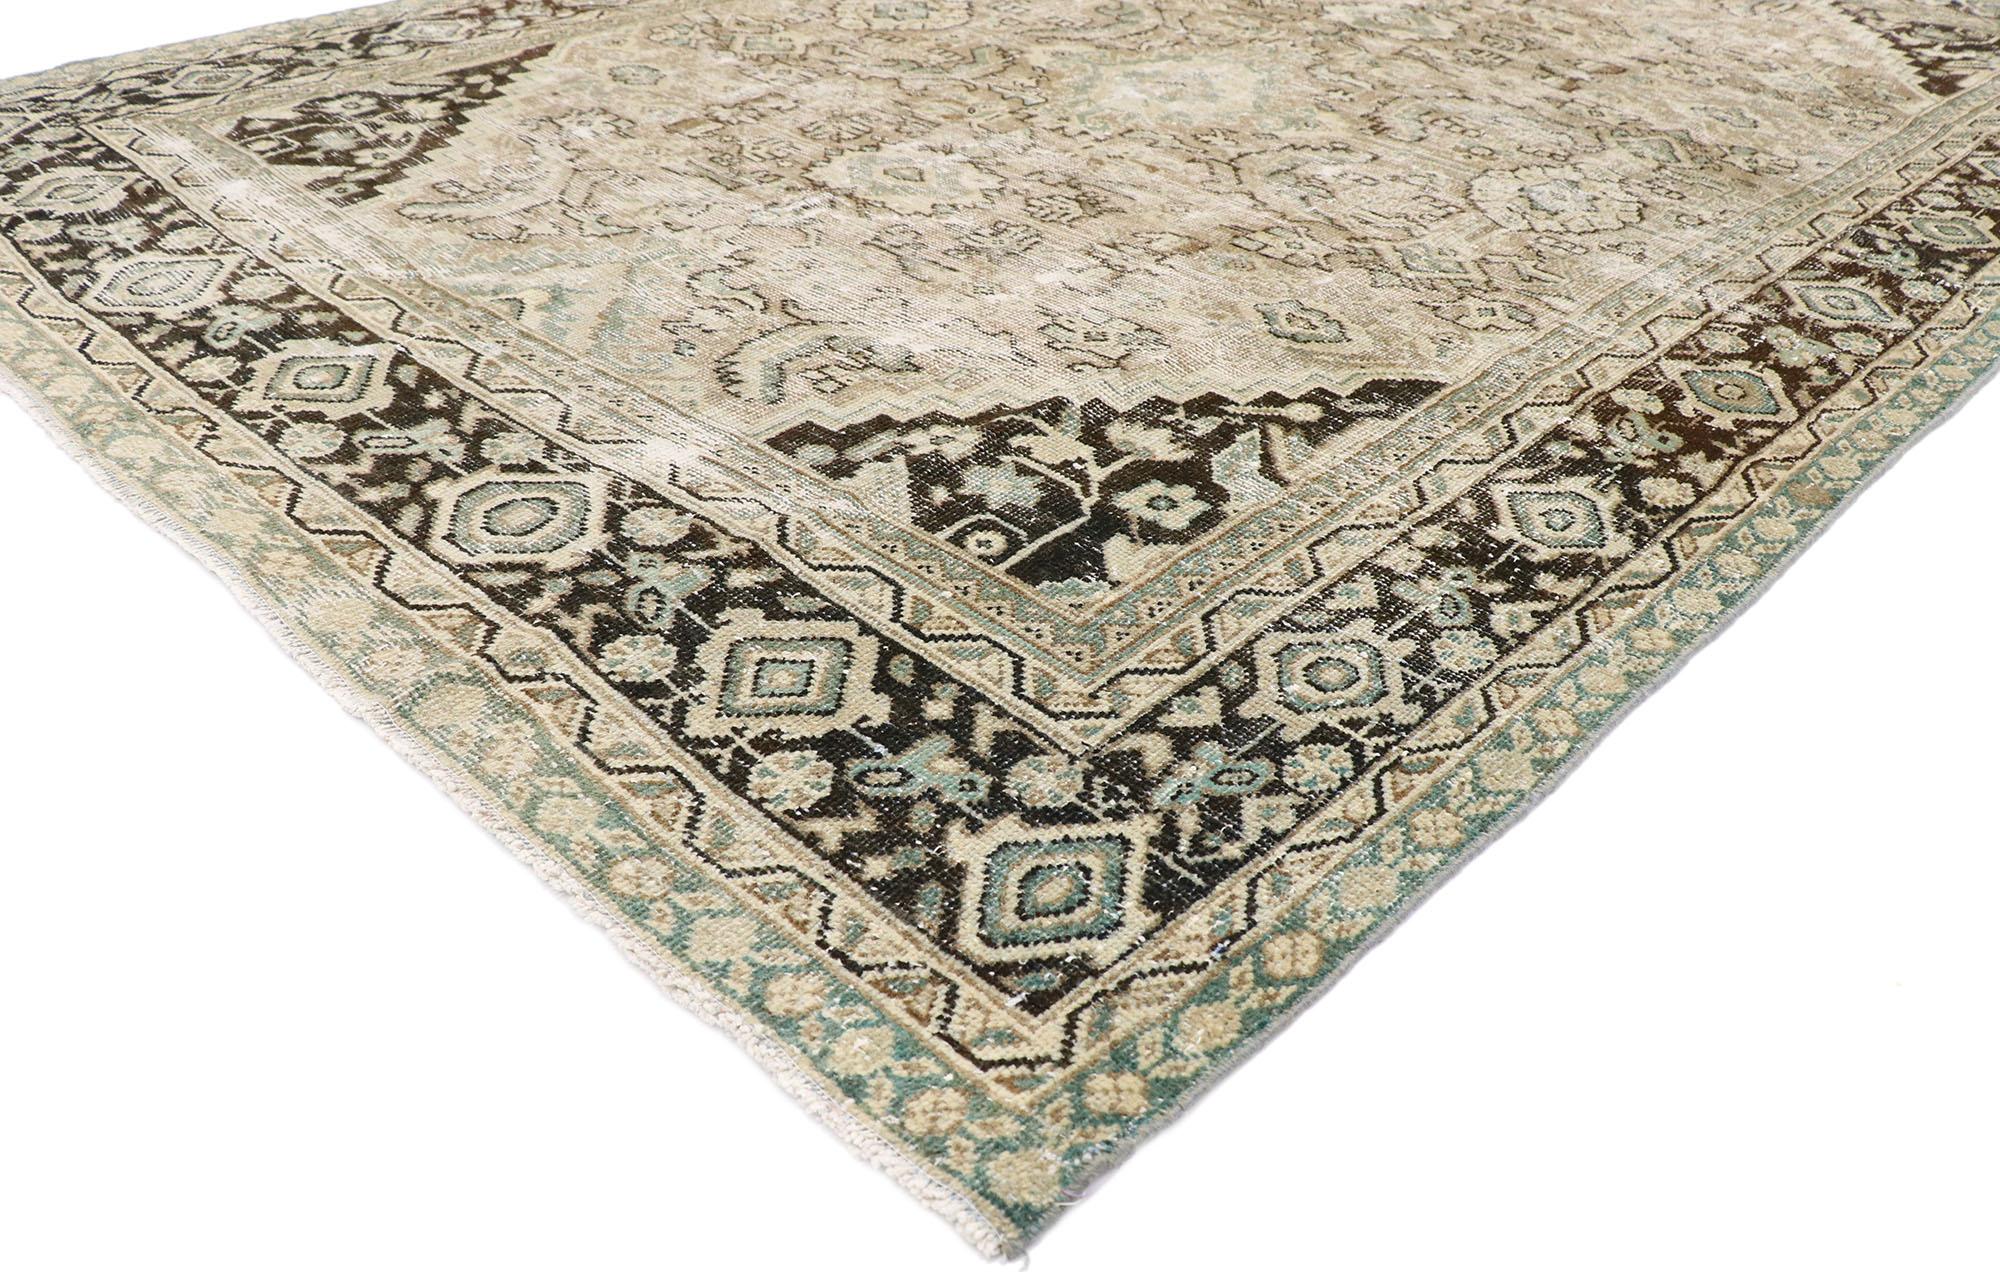 60855 Distressed Antique Persian Mahal rug with Modern Rustic Industrial style. With its timeless design and modern industrial style with rustic sensibility, this hand knotted wool distressed antique Persian Mahal rug will take on a curated lived-in